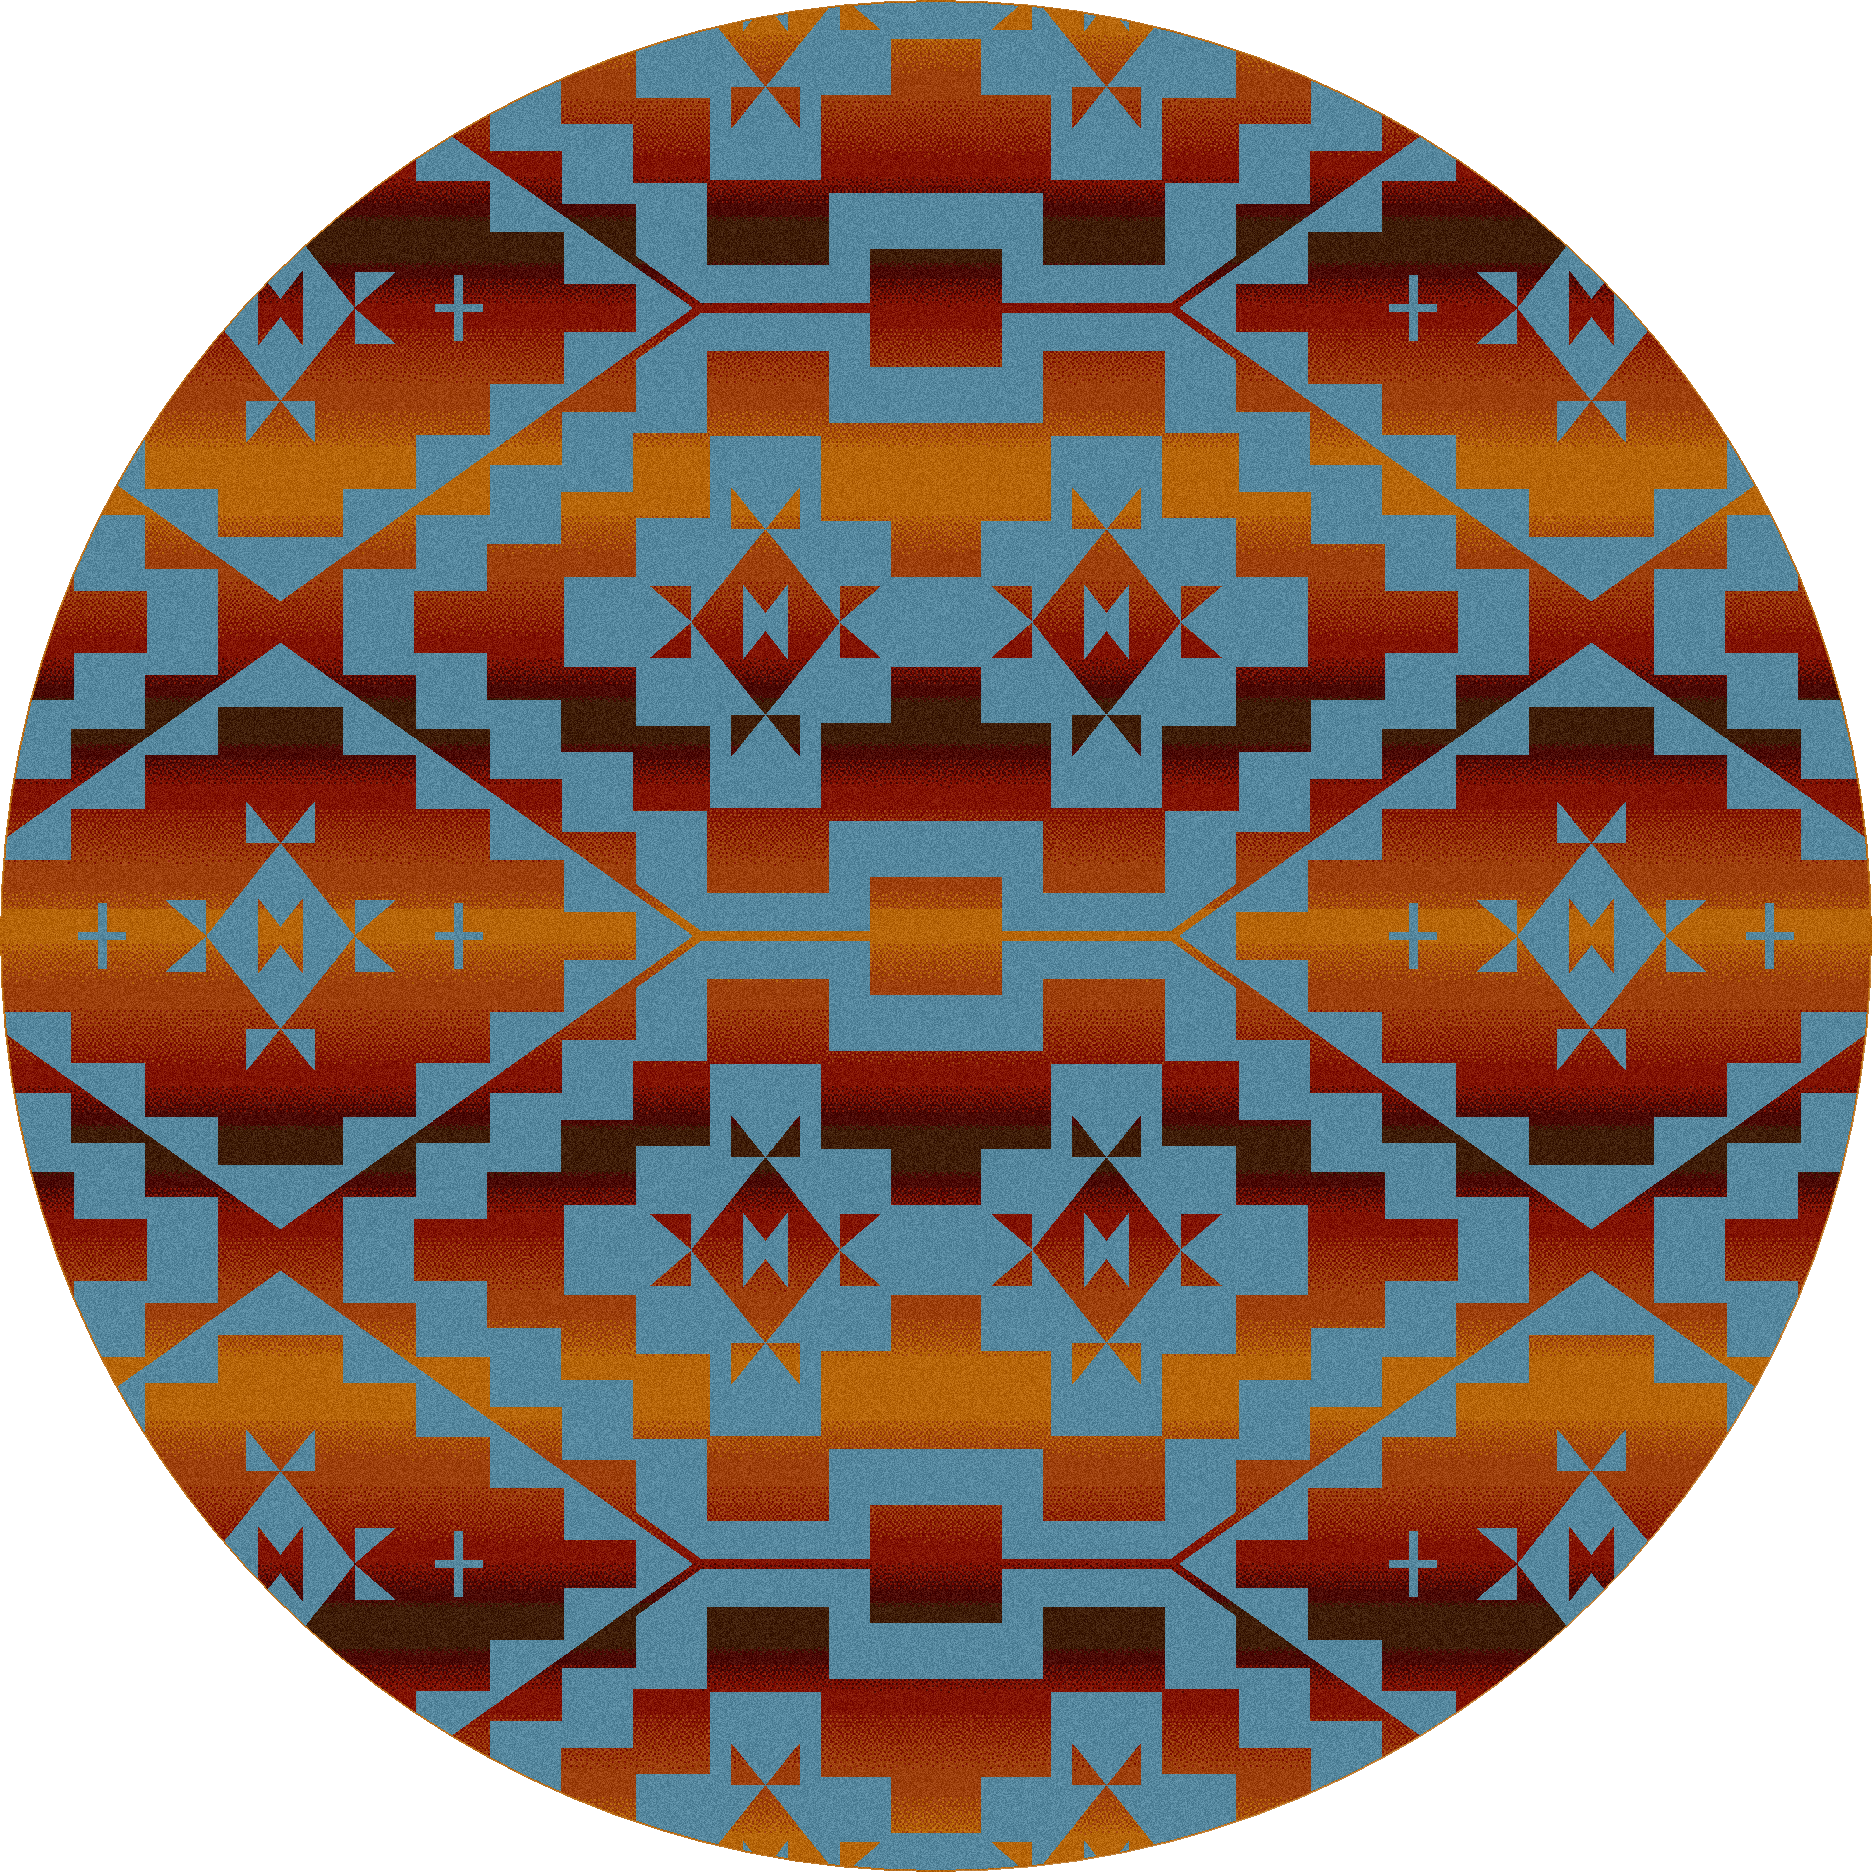 A Circular Pattern With Blue And Orange And Brown Triangles